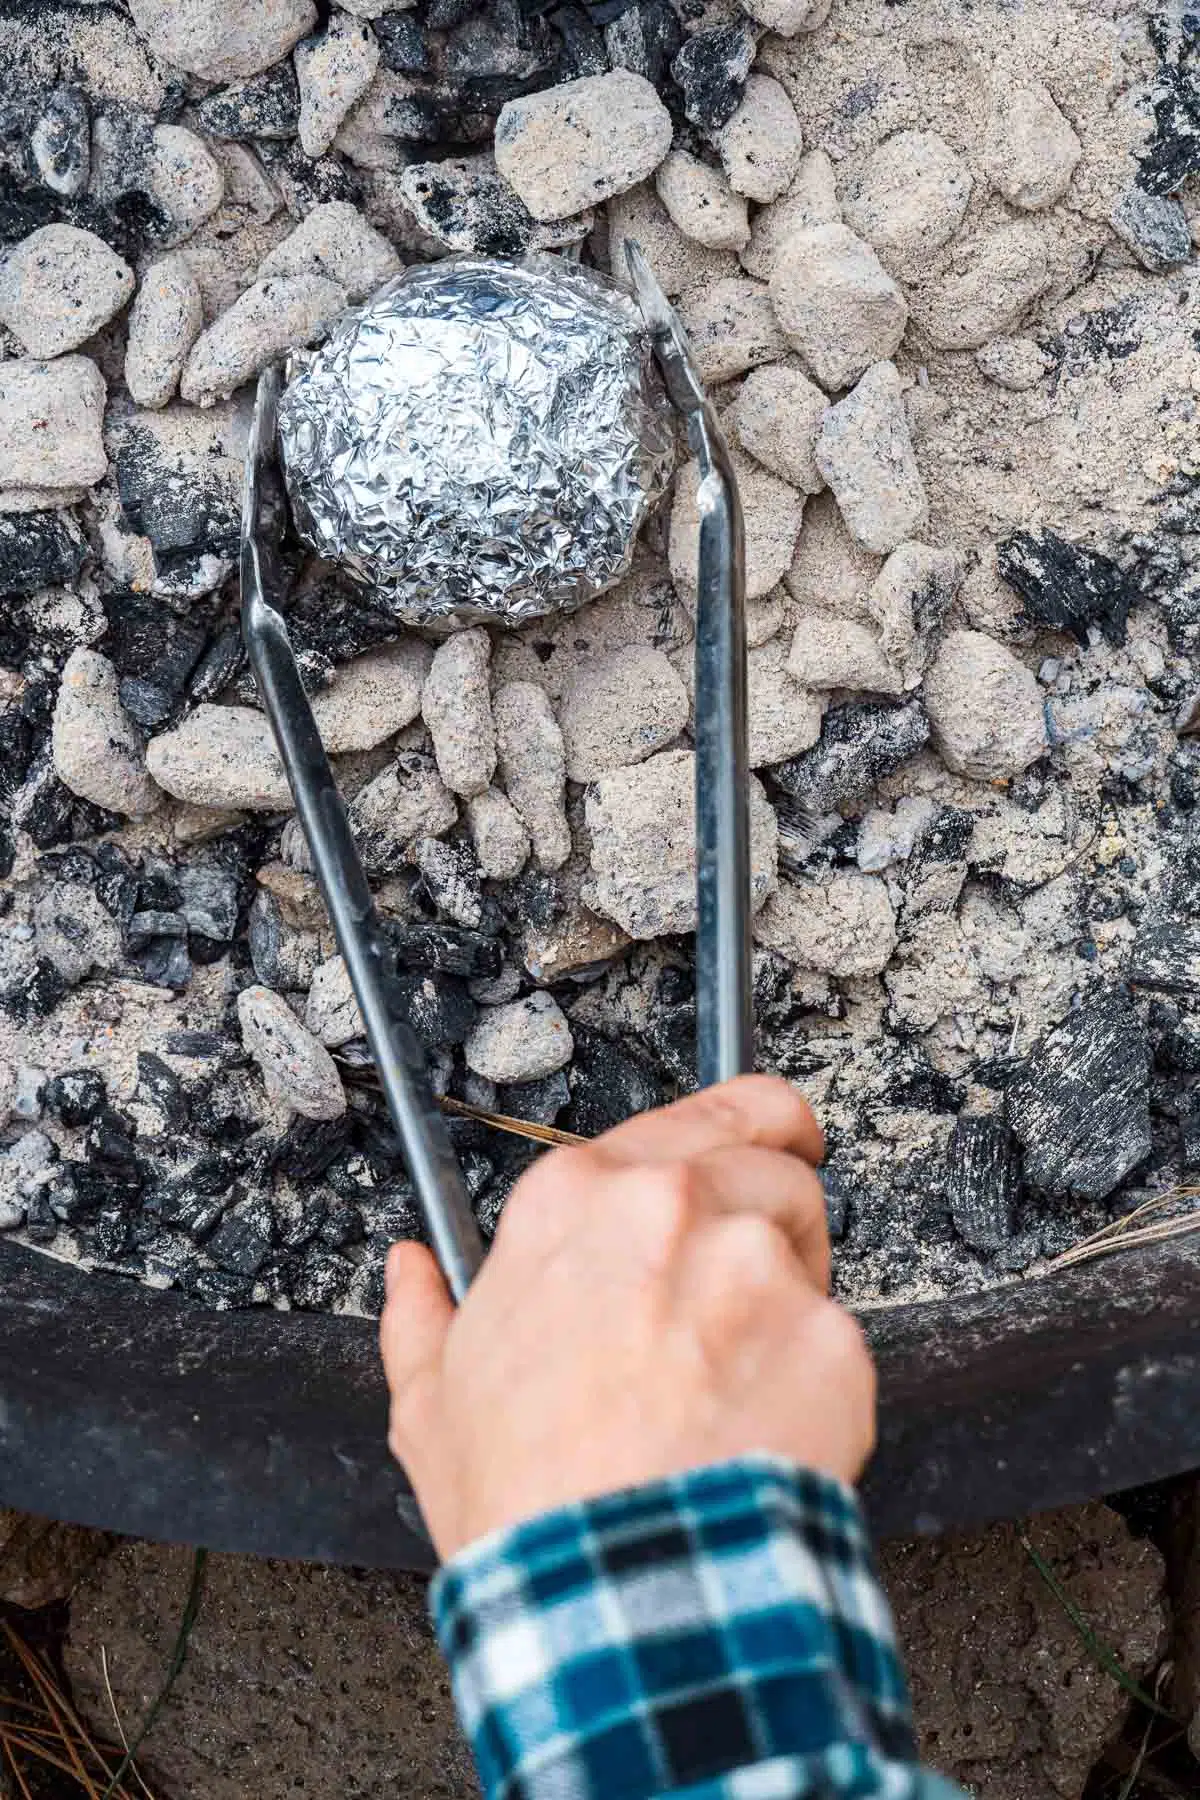 Using tongs to place a foil wrapped apple into a campfire.